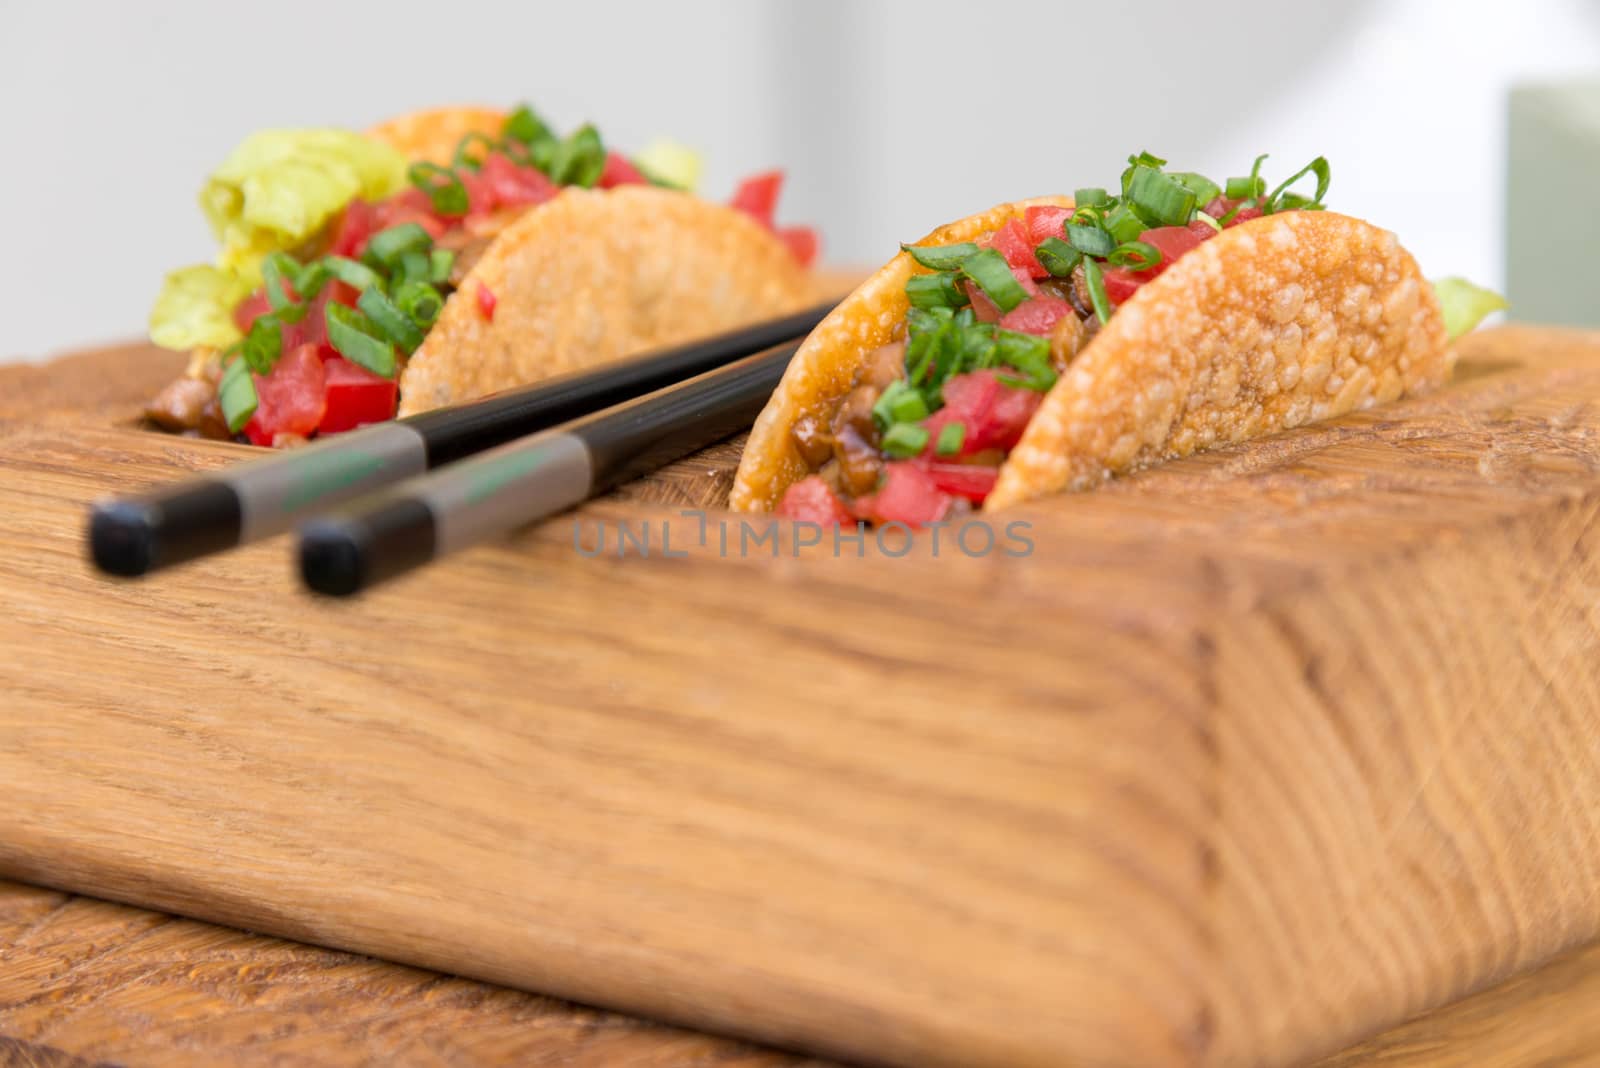 the fresh mexican taco shells with beef and vegetables